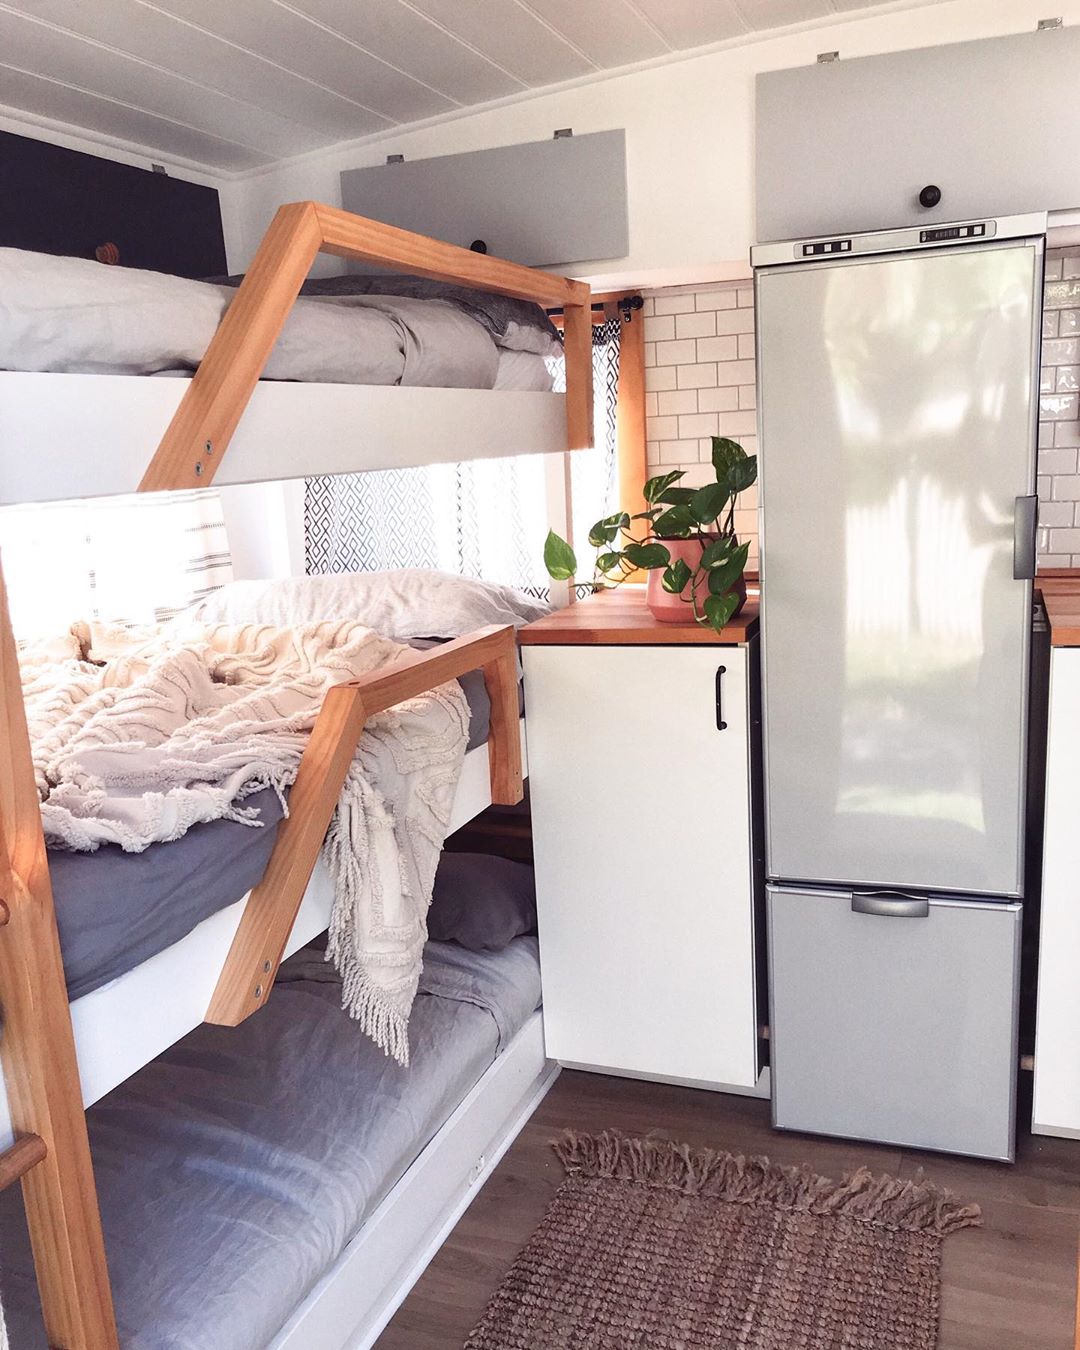 Rv Bunk Beds Obsession, Trailer Bunk Beds